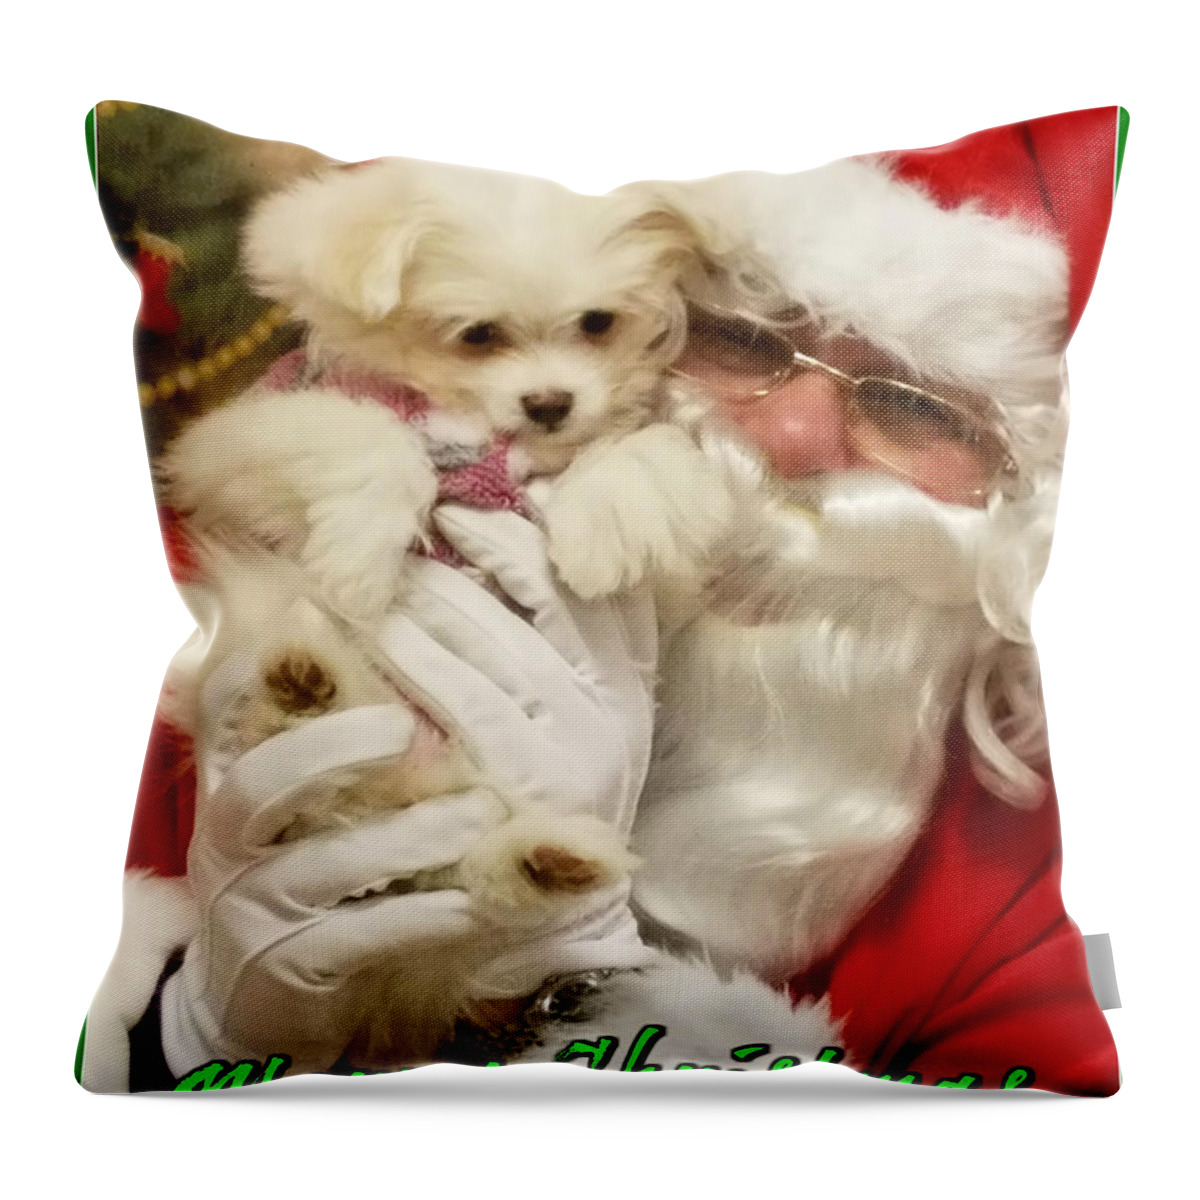 Puppy Throw Pillow featuring the painting Santa Paws by Darren Robinson